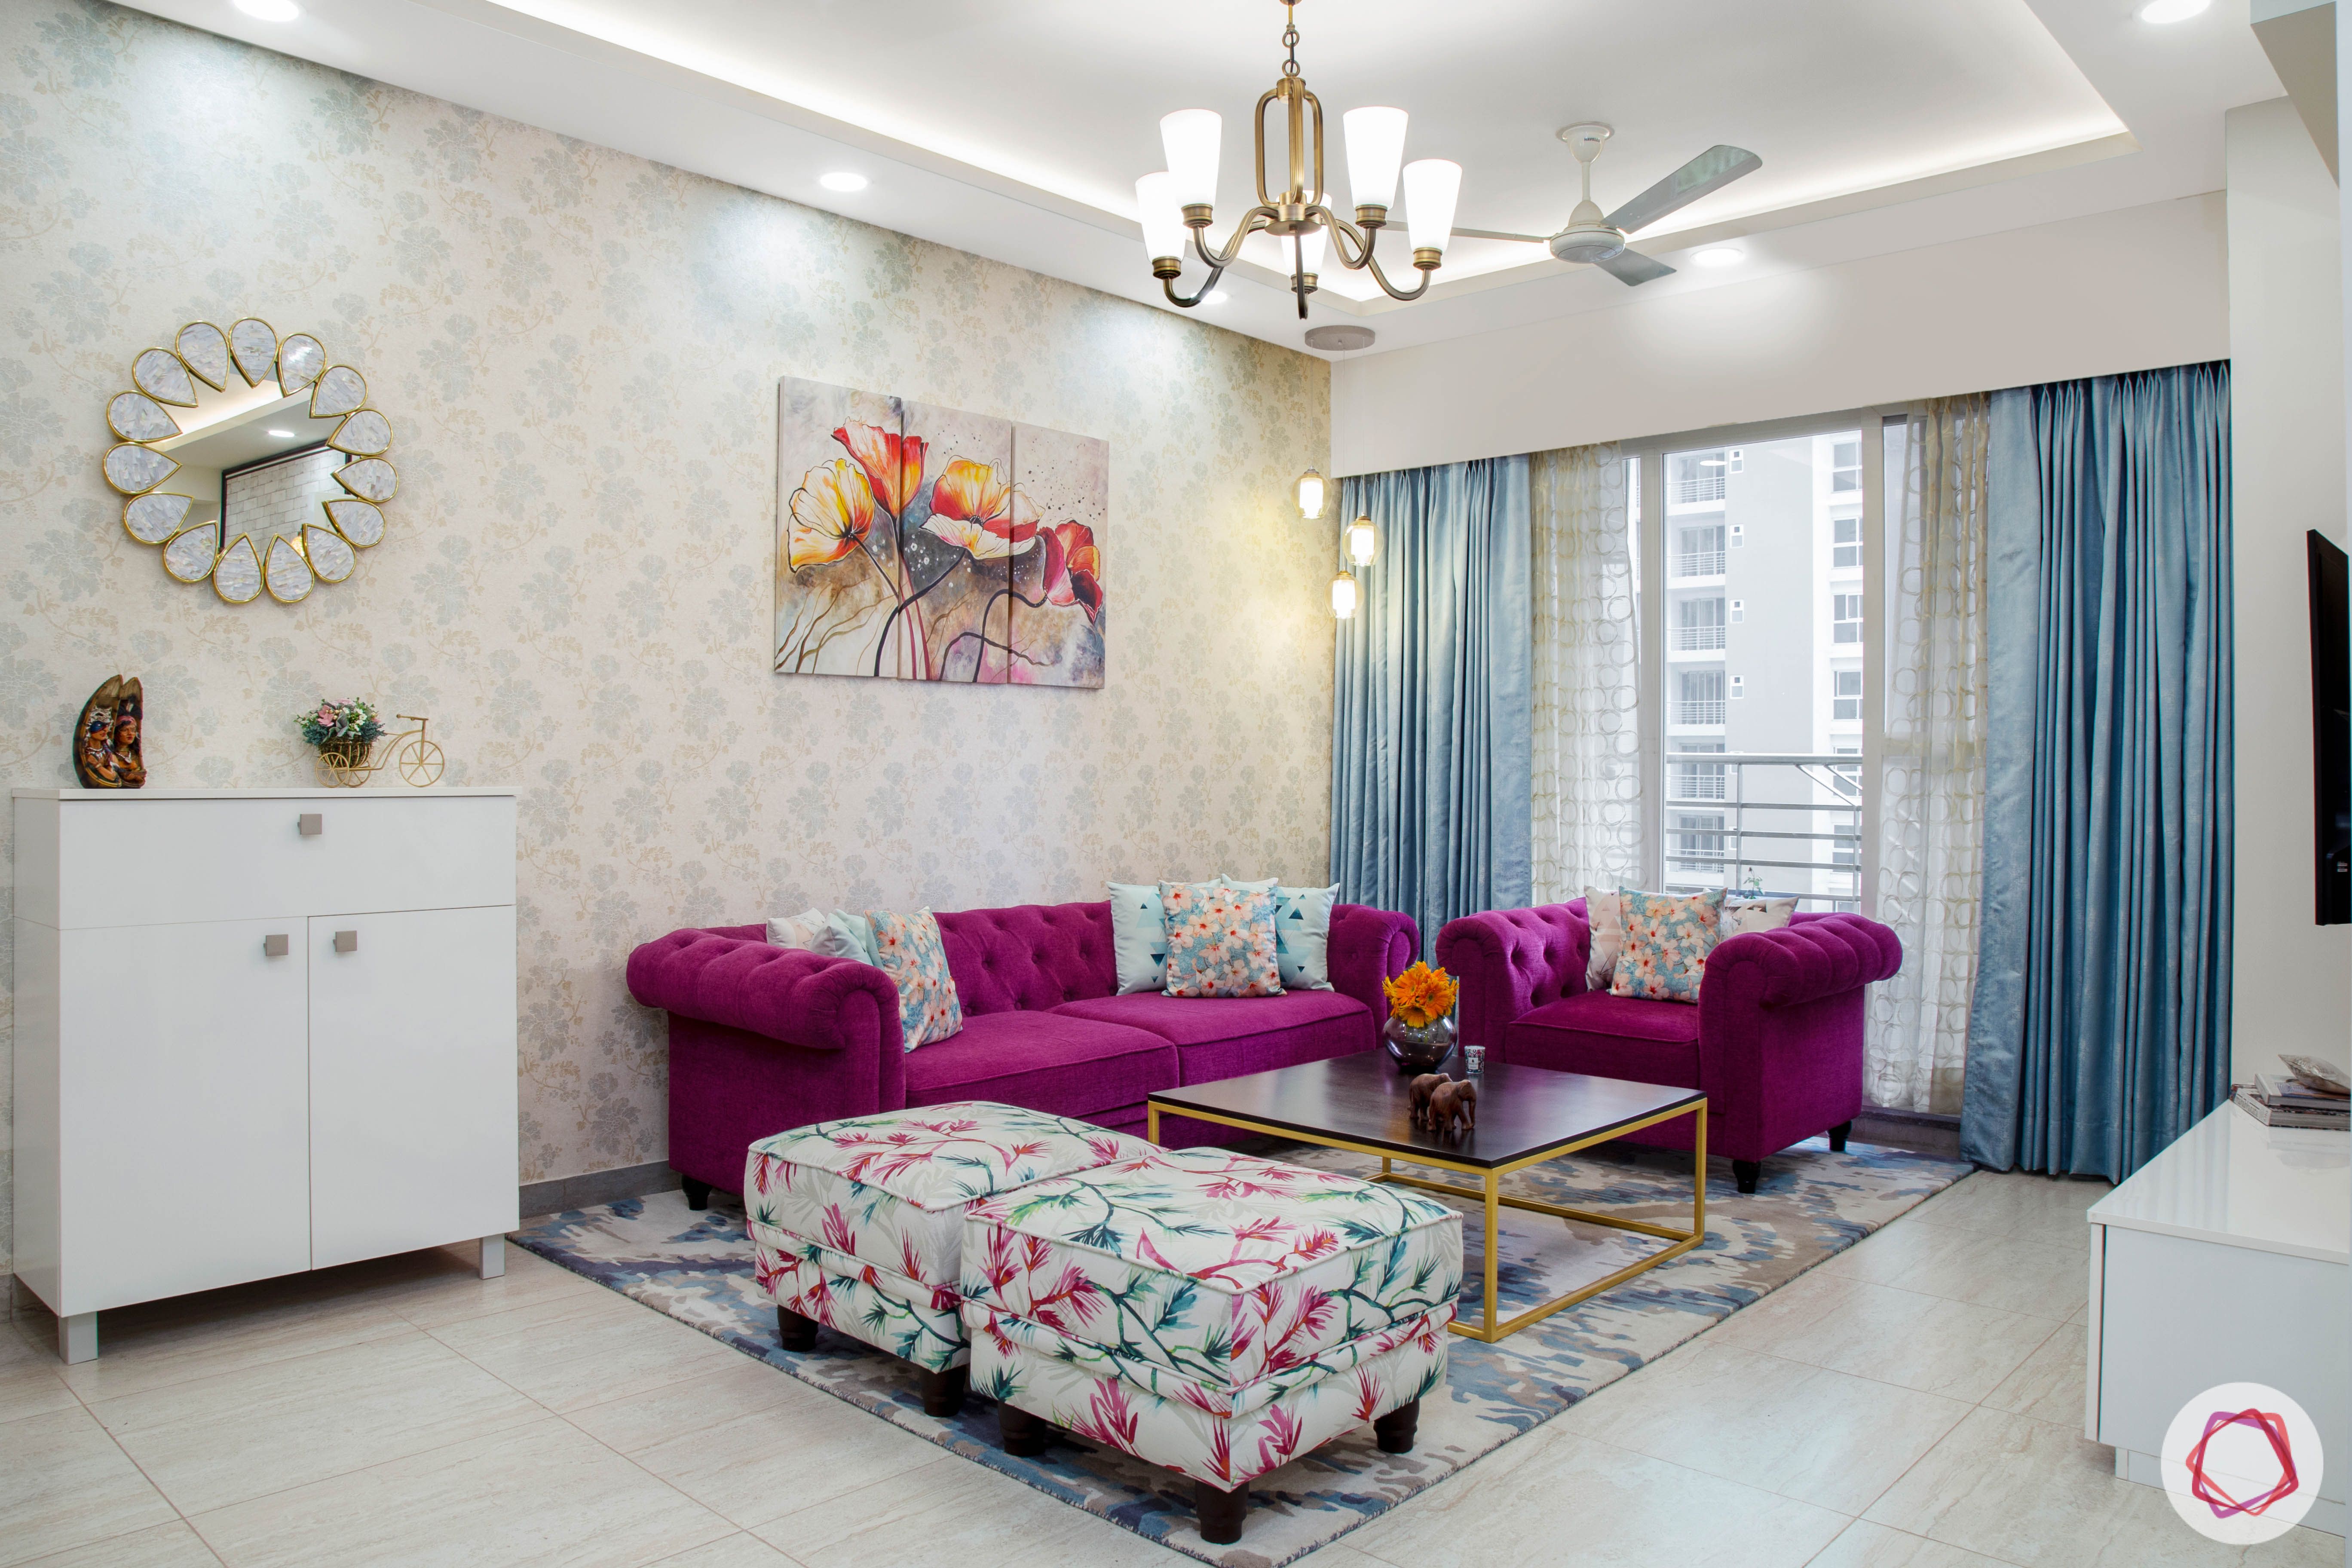 Cleo county noida_living room with purple colour sofa and floral ottomans